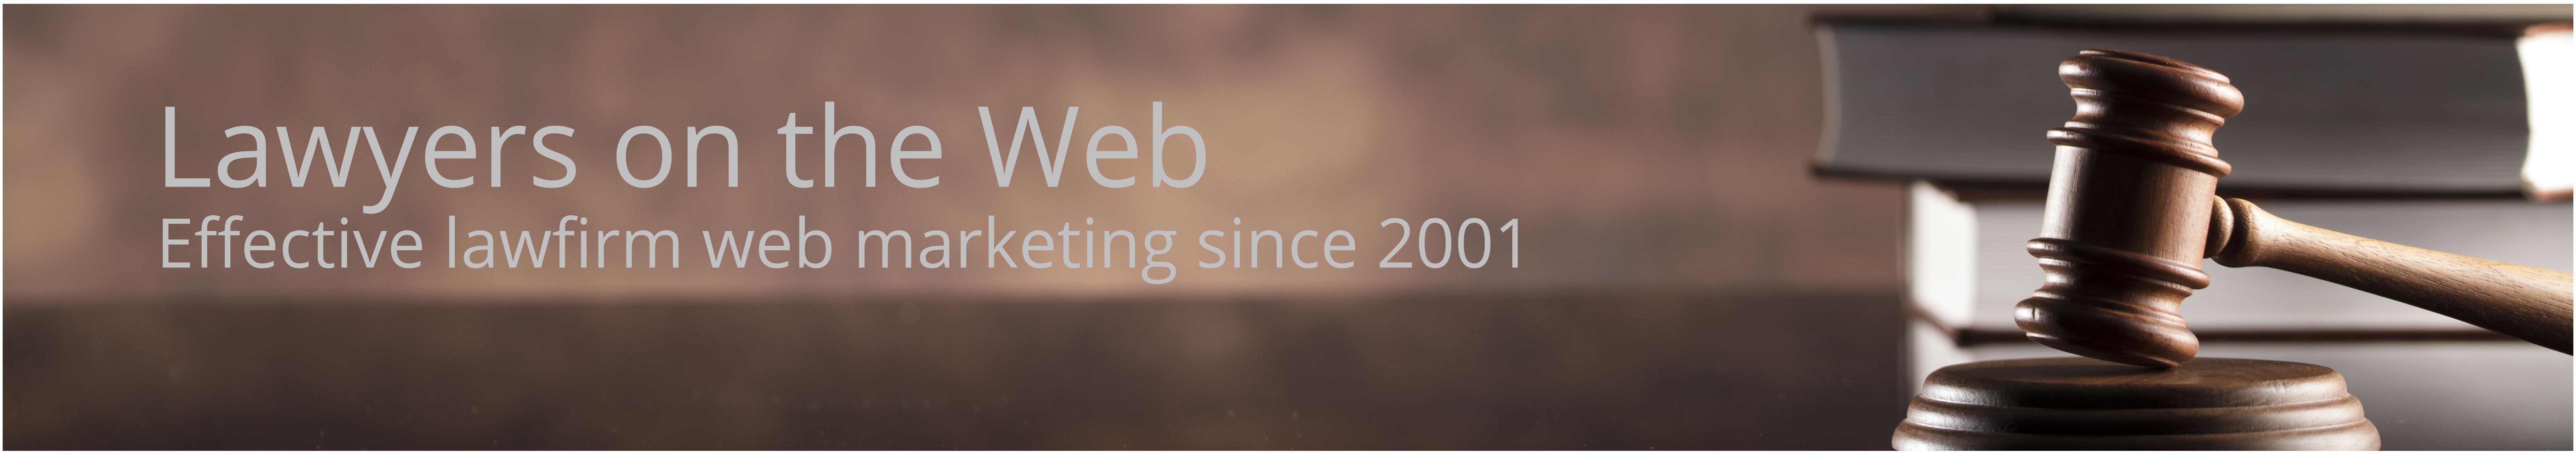 Lawyers on the web | Web marketing for law firms